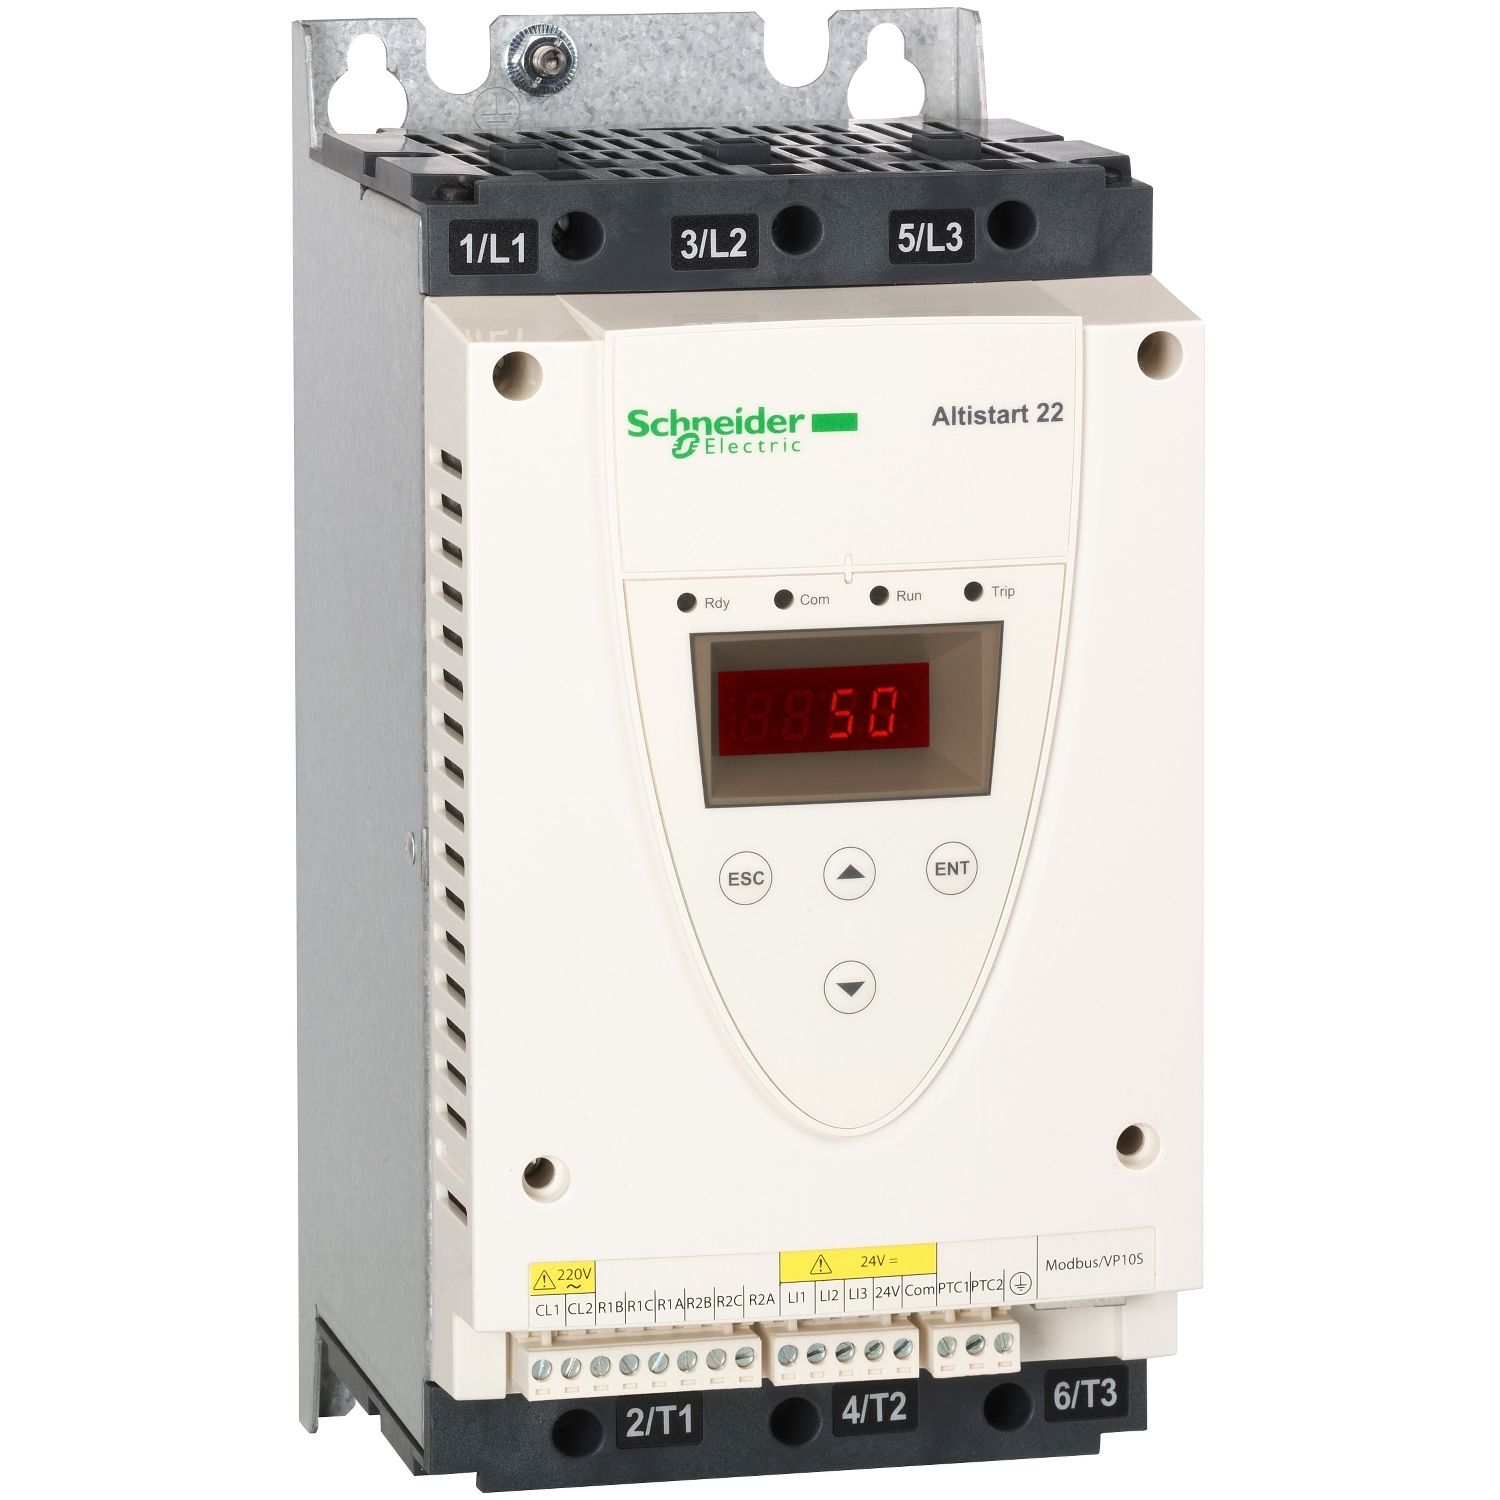 ATS22D32Q soft starter for asynchronous motor, Altistart 22, control 230V, 230 to  440V, 7.5 to 15kW